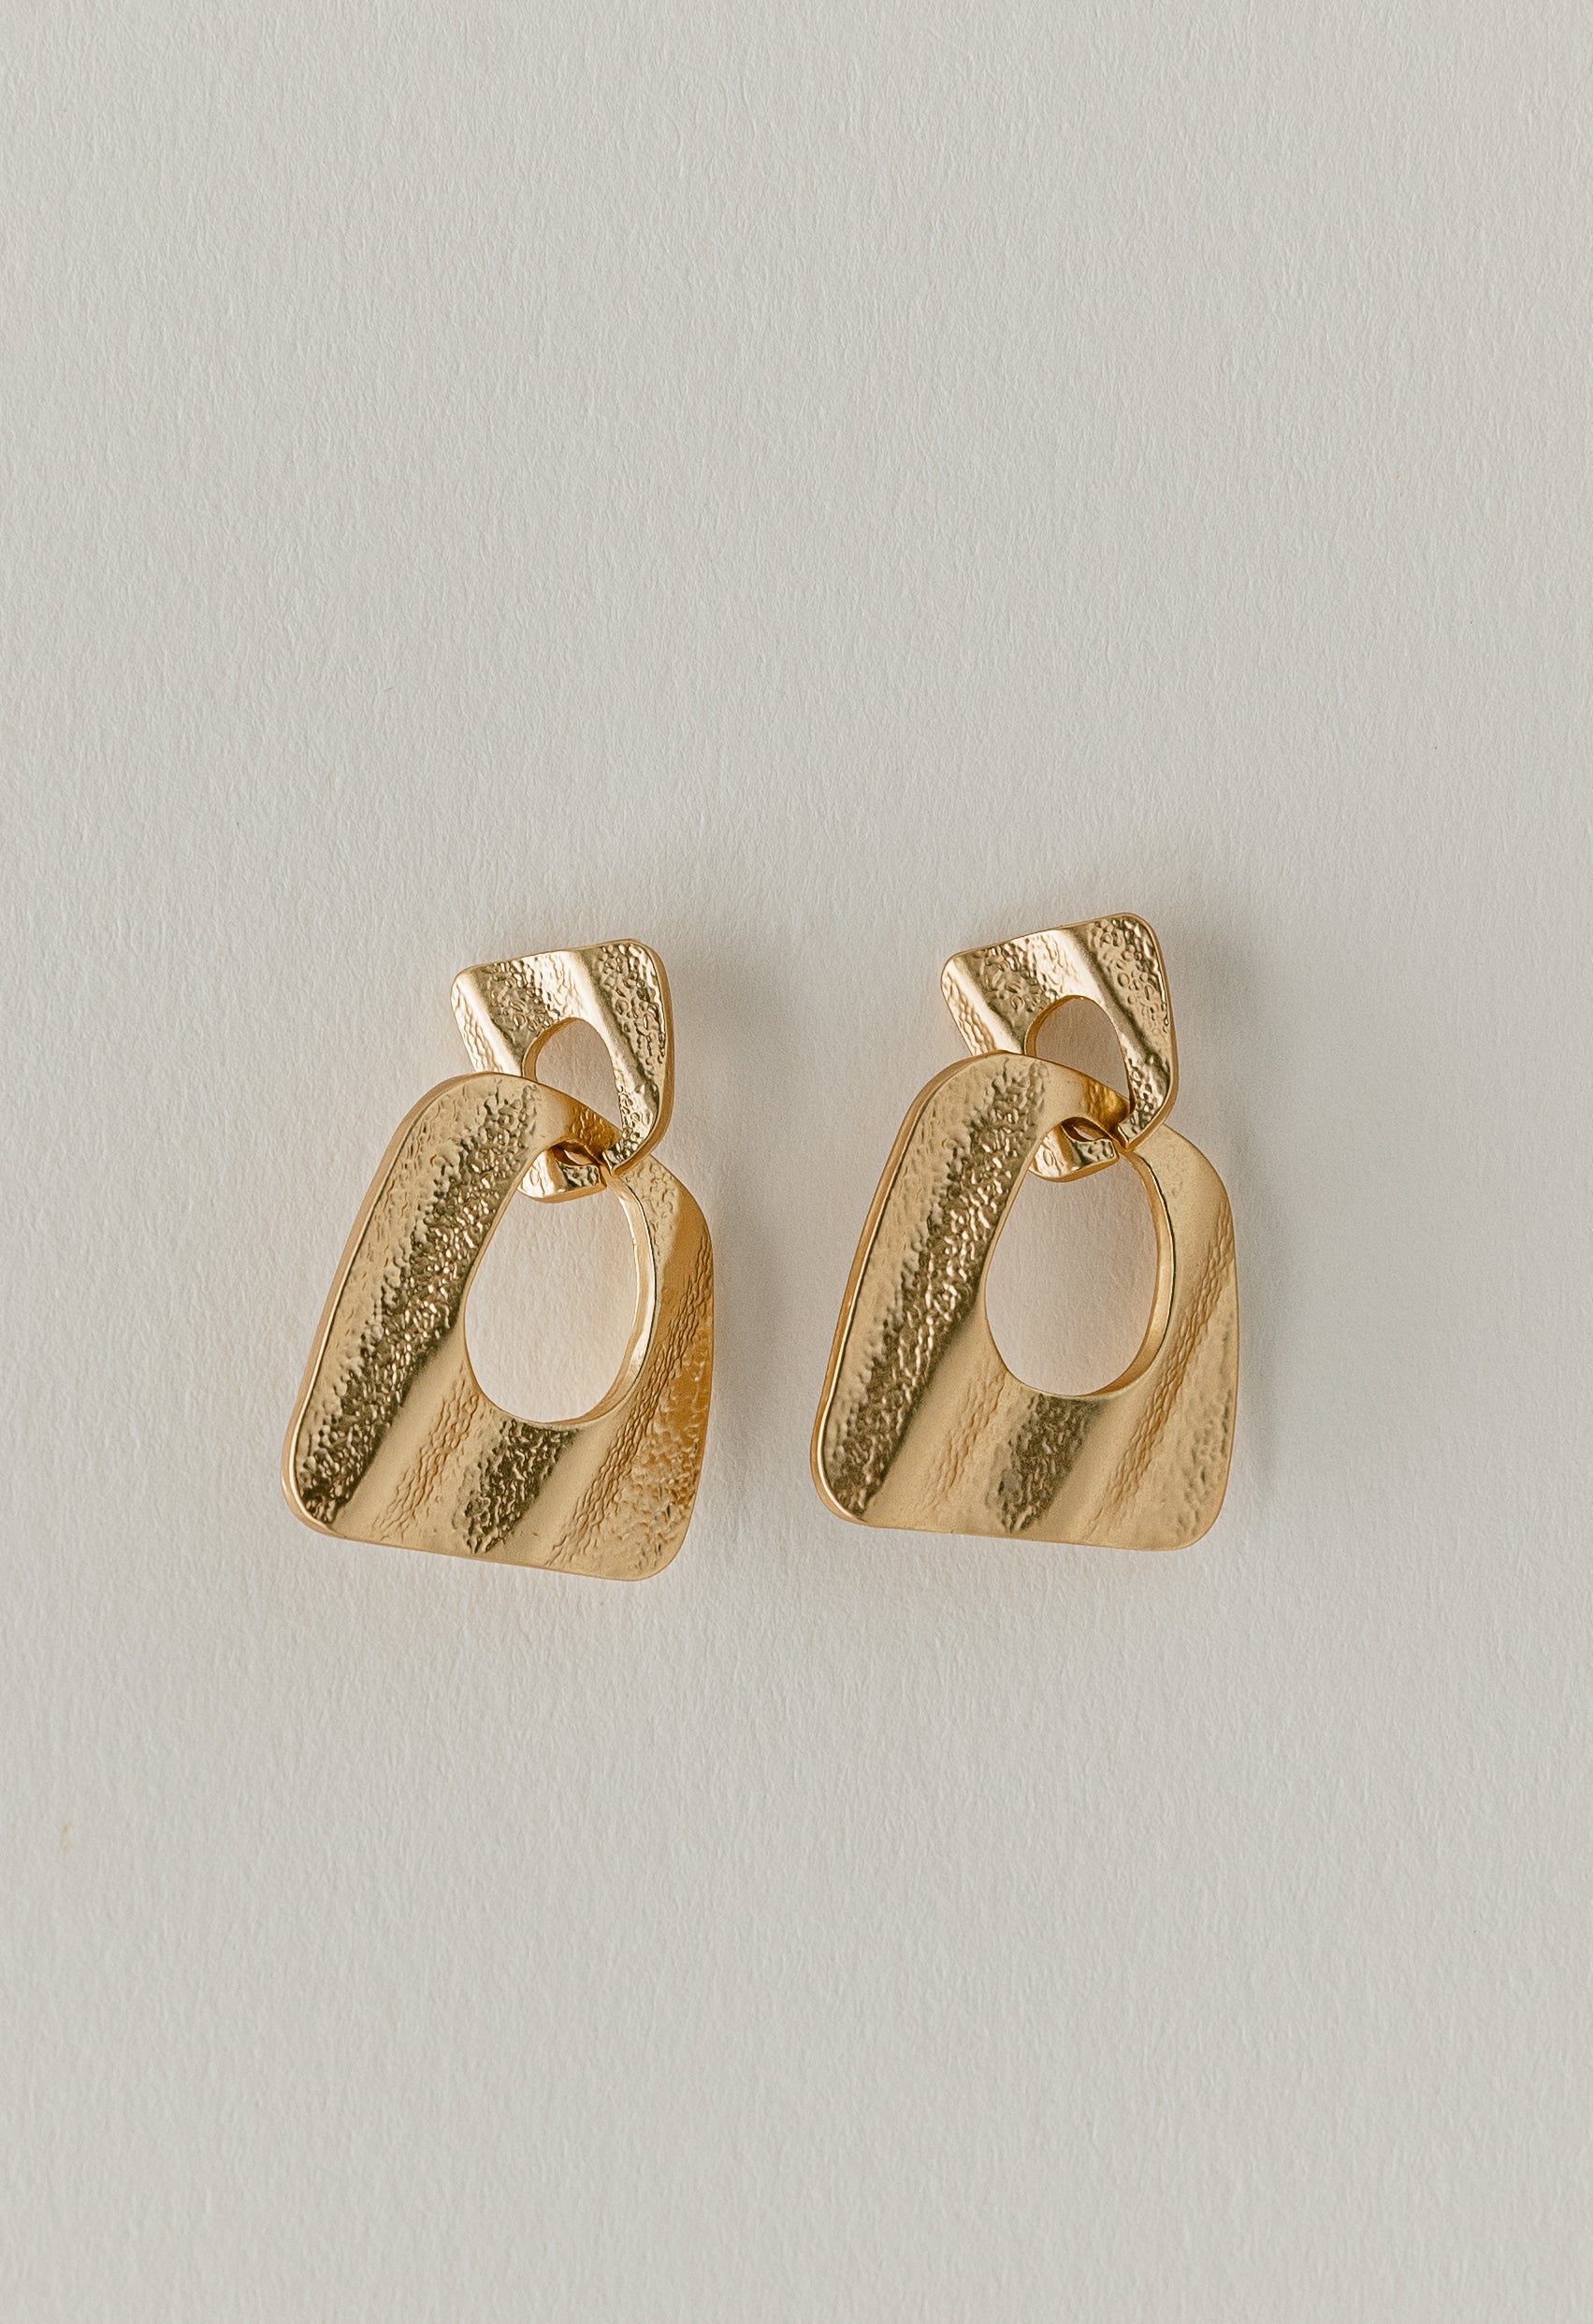 Oasis Earrings - GOLD - willows clothing Earrings